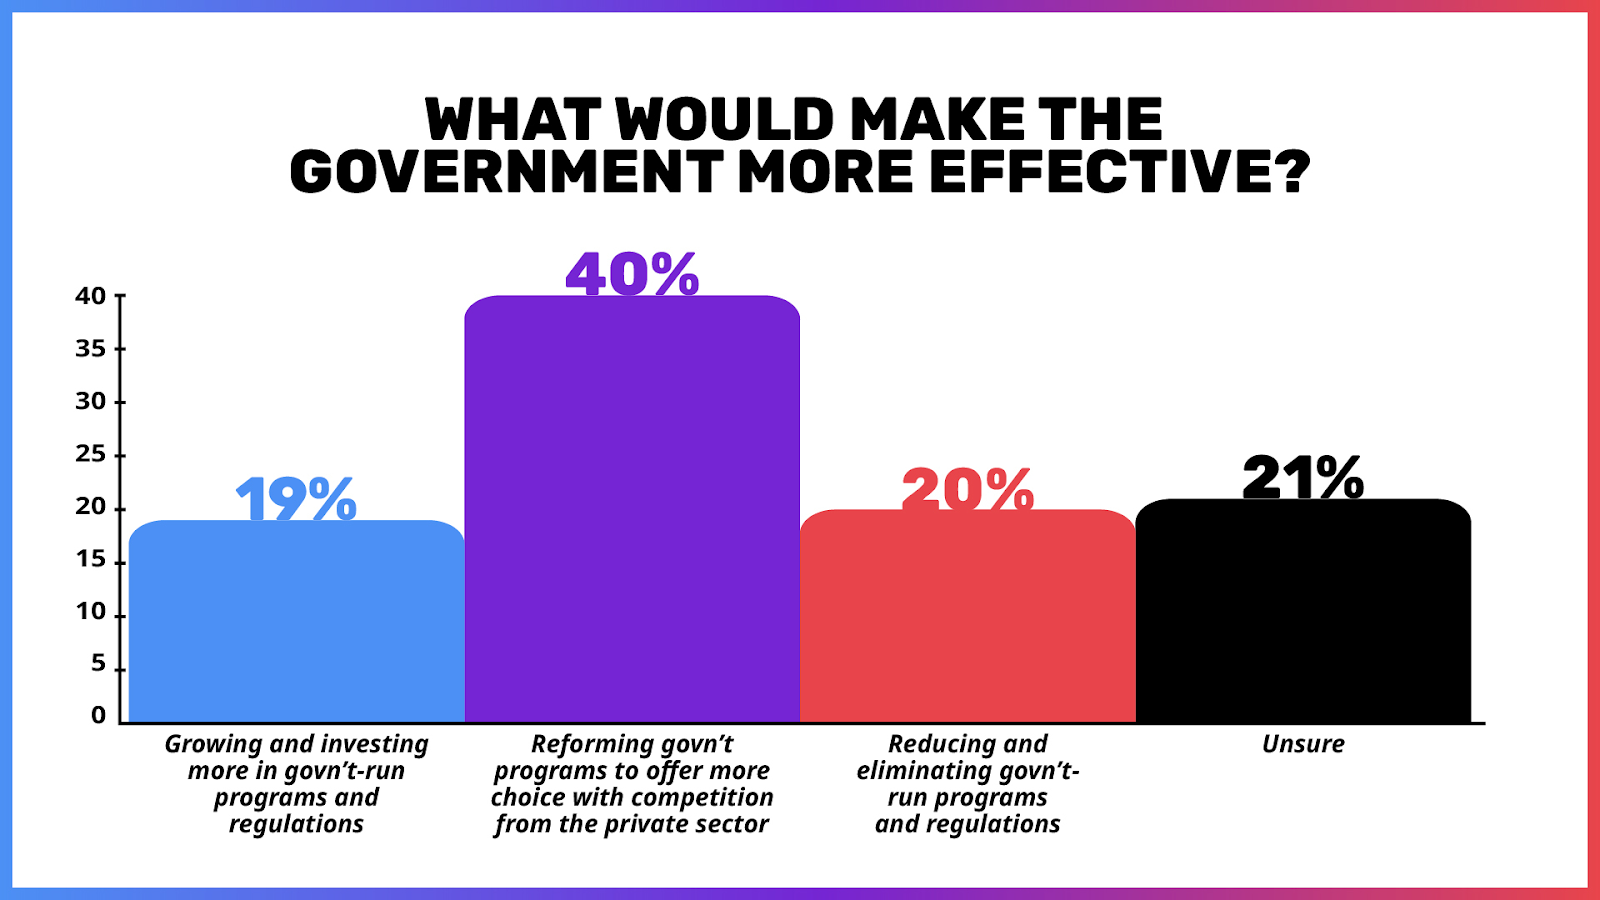 A bar chart with the title 'What would make the government more effective?' It displays three options: 'Growing and investing more in gov't-run programs and regulations' at 19% in blue, 'Reforming gov't programs to offer more choice with competition from the private sector' at 40% in purple, 'Reducing and eliminating gov't-run programs and regulations' at 20% in red, and 'Unsure' at 21% in black.